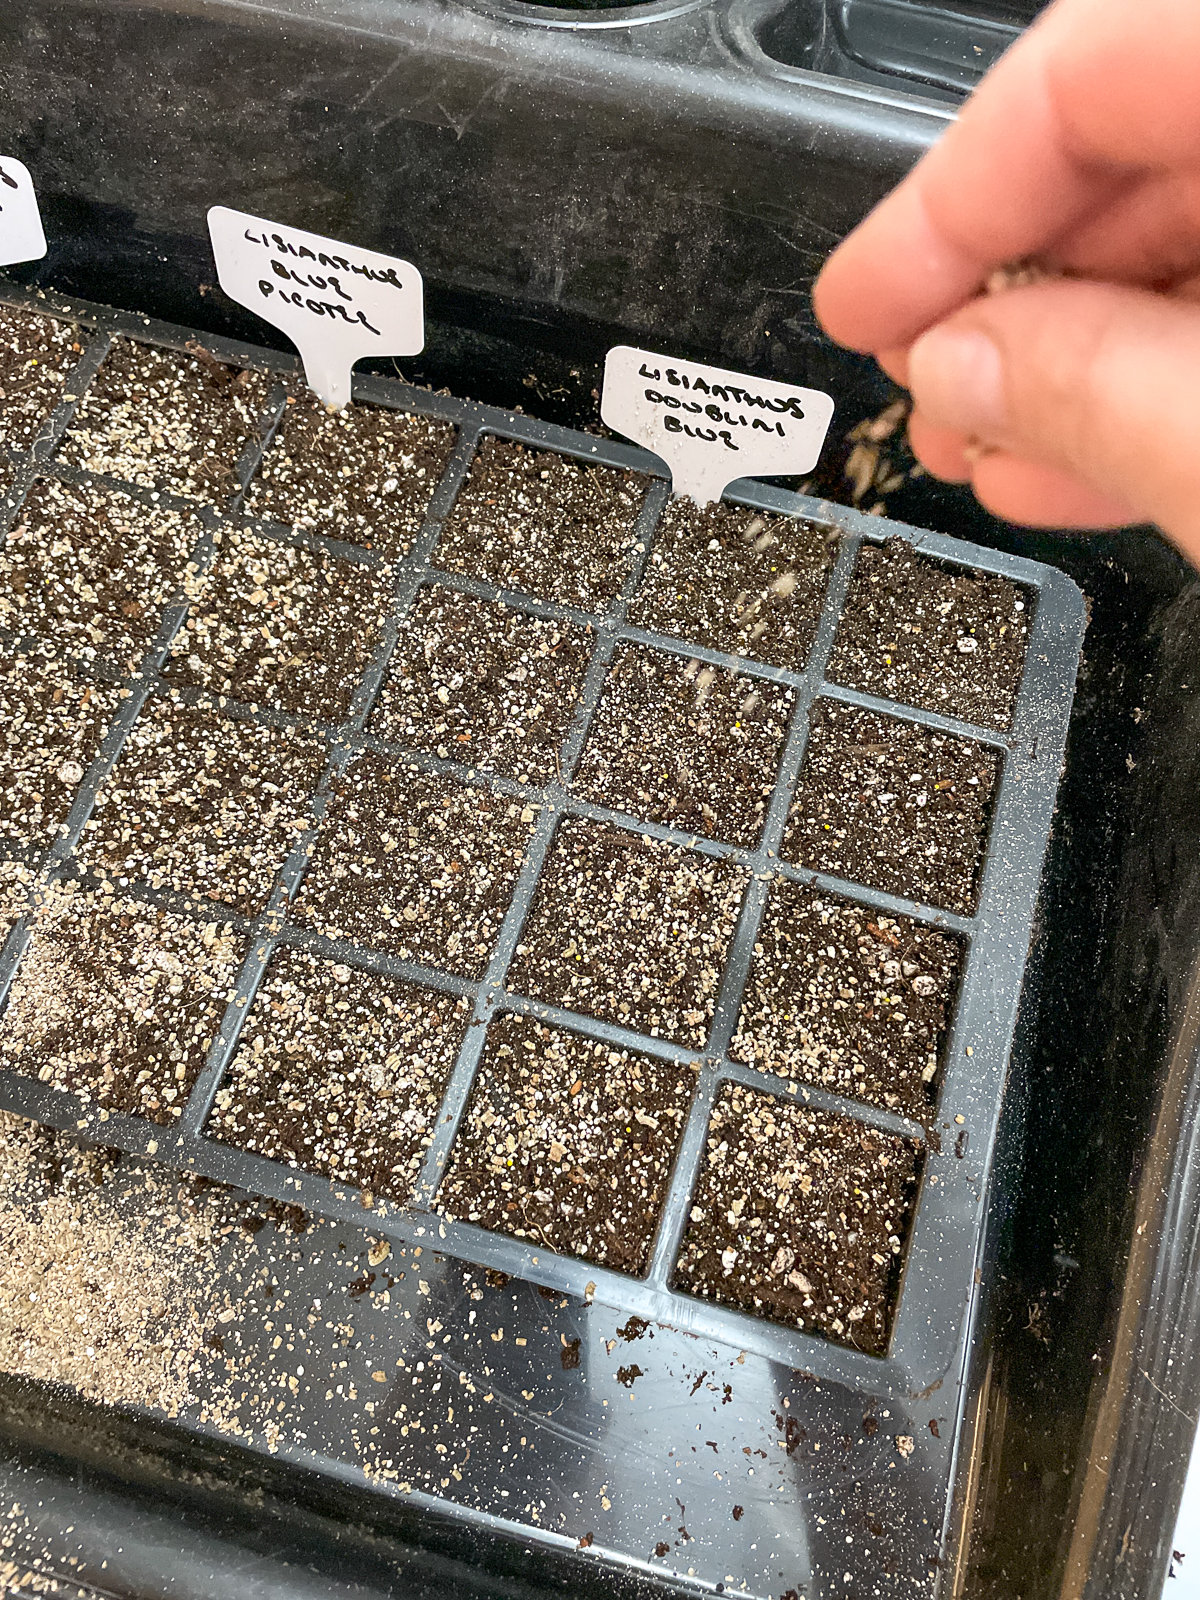 sprinkling vermiculite on lisianthus seed soil surface to prevent algae growth